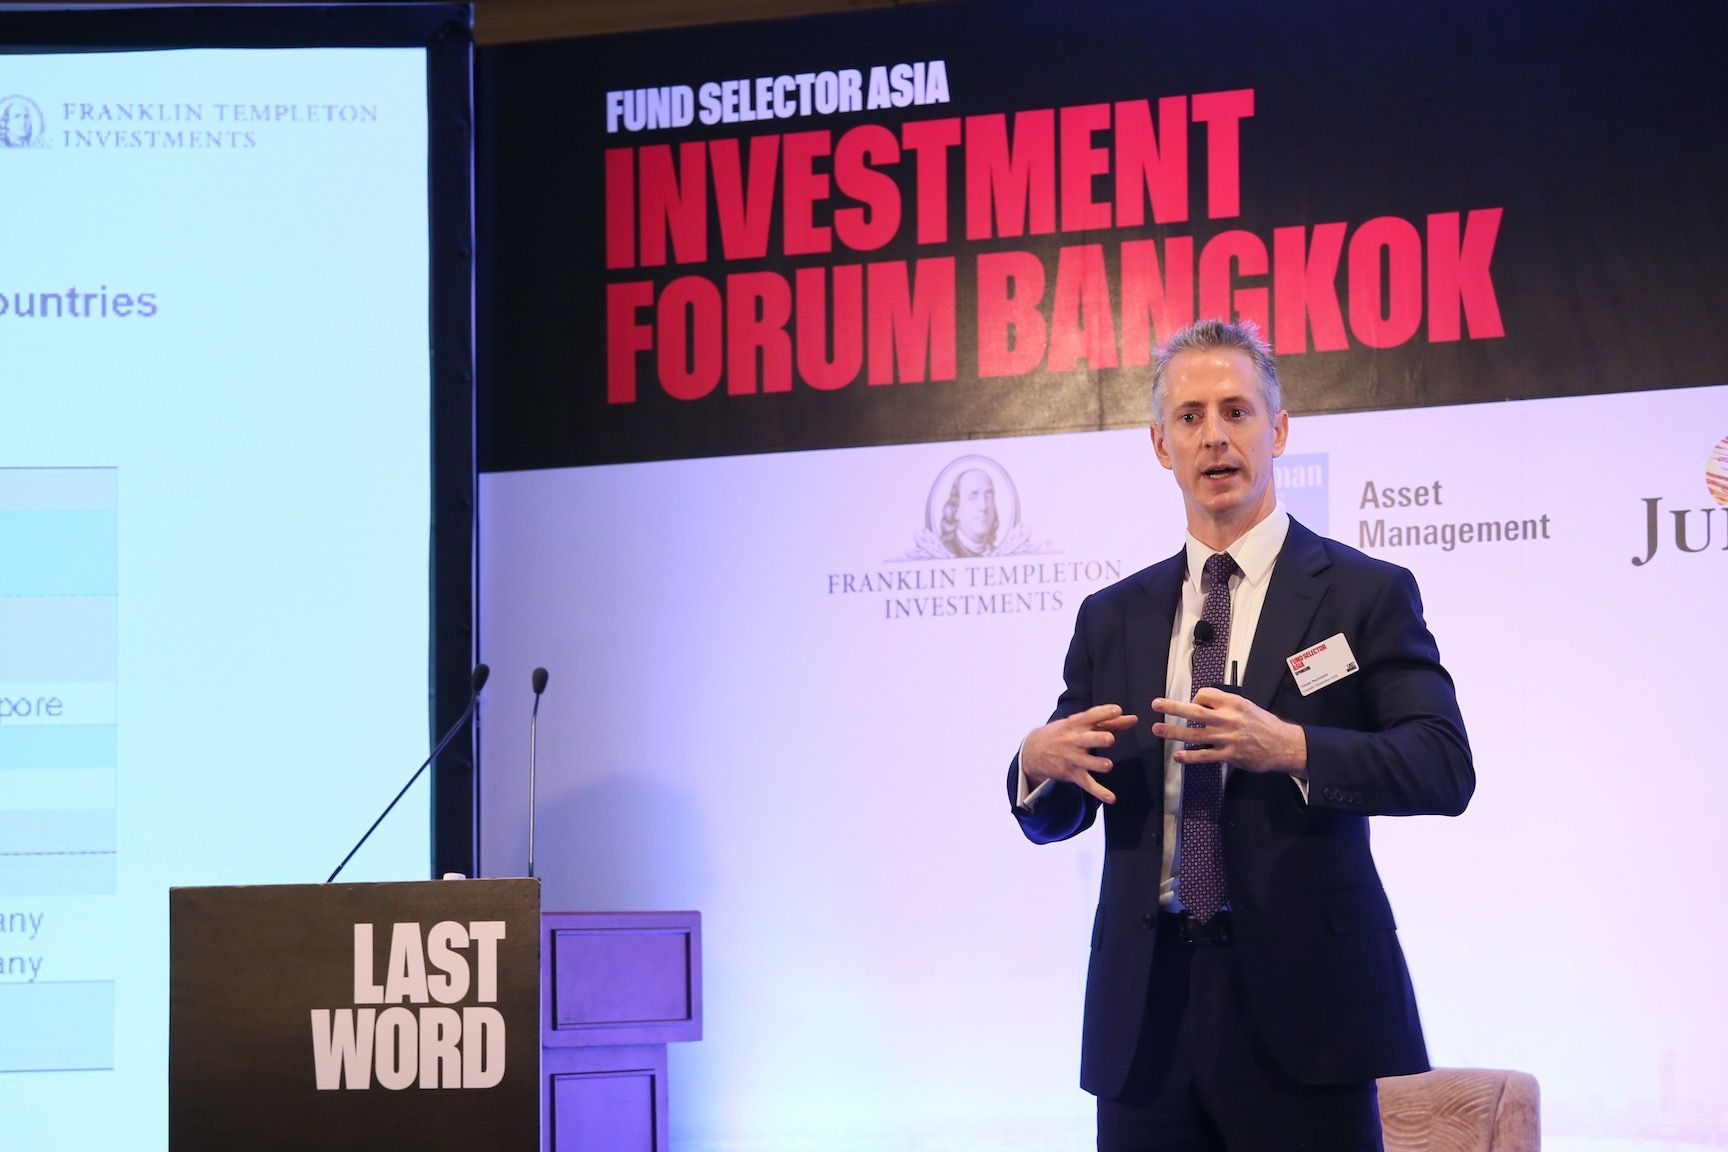 Presentation by Alistair MacDonald, vice president, institutional portfolio manager, Franklin Templeton emerging markets equity, Franklin Templeton Investments